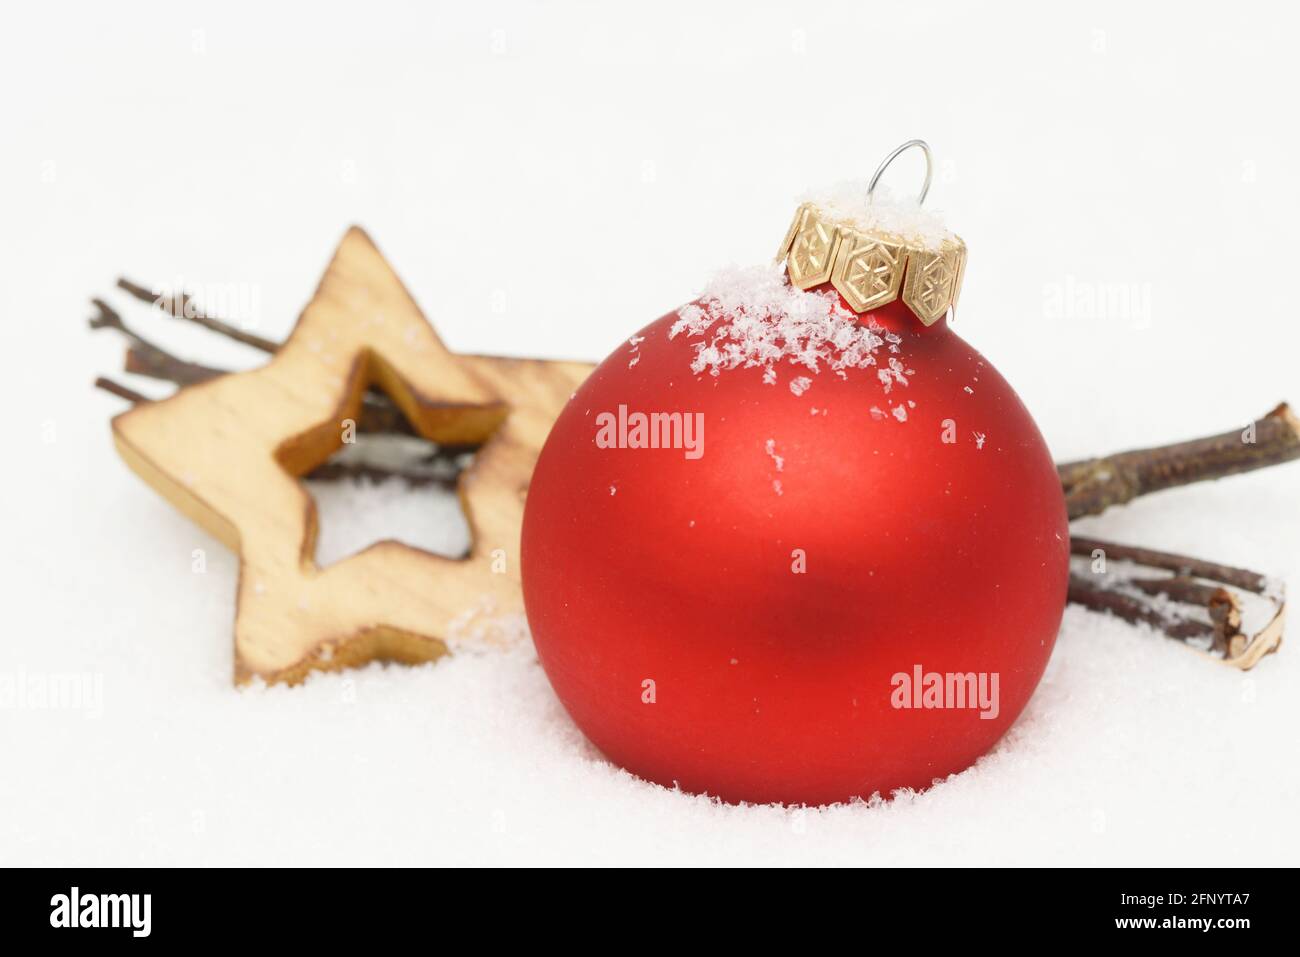 red christmas ornament, branch and wooden star lying in snow Stock Photo